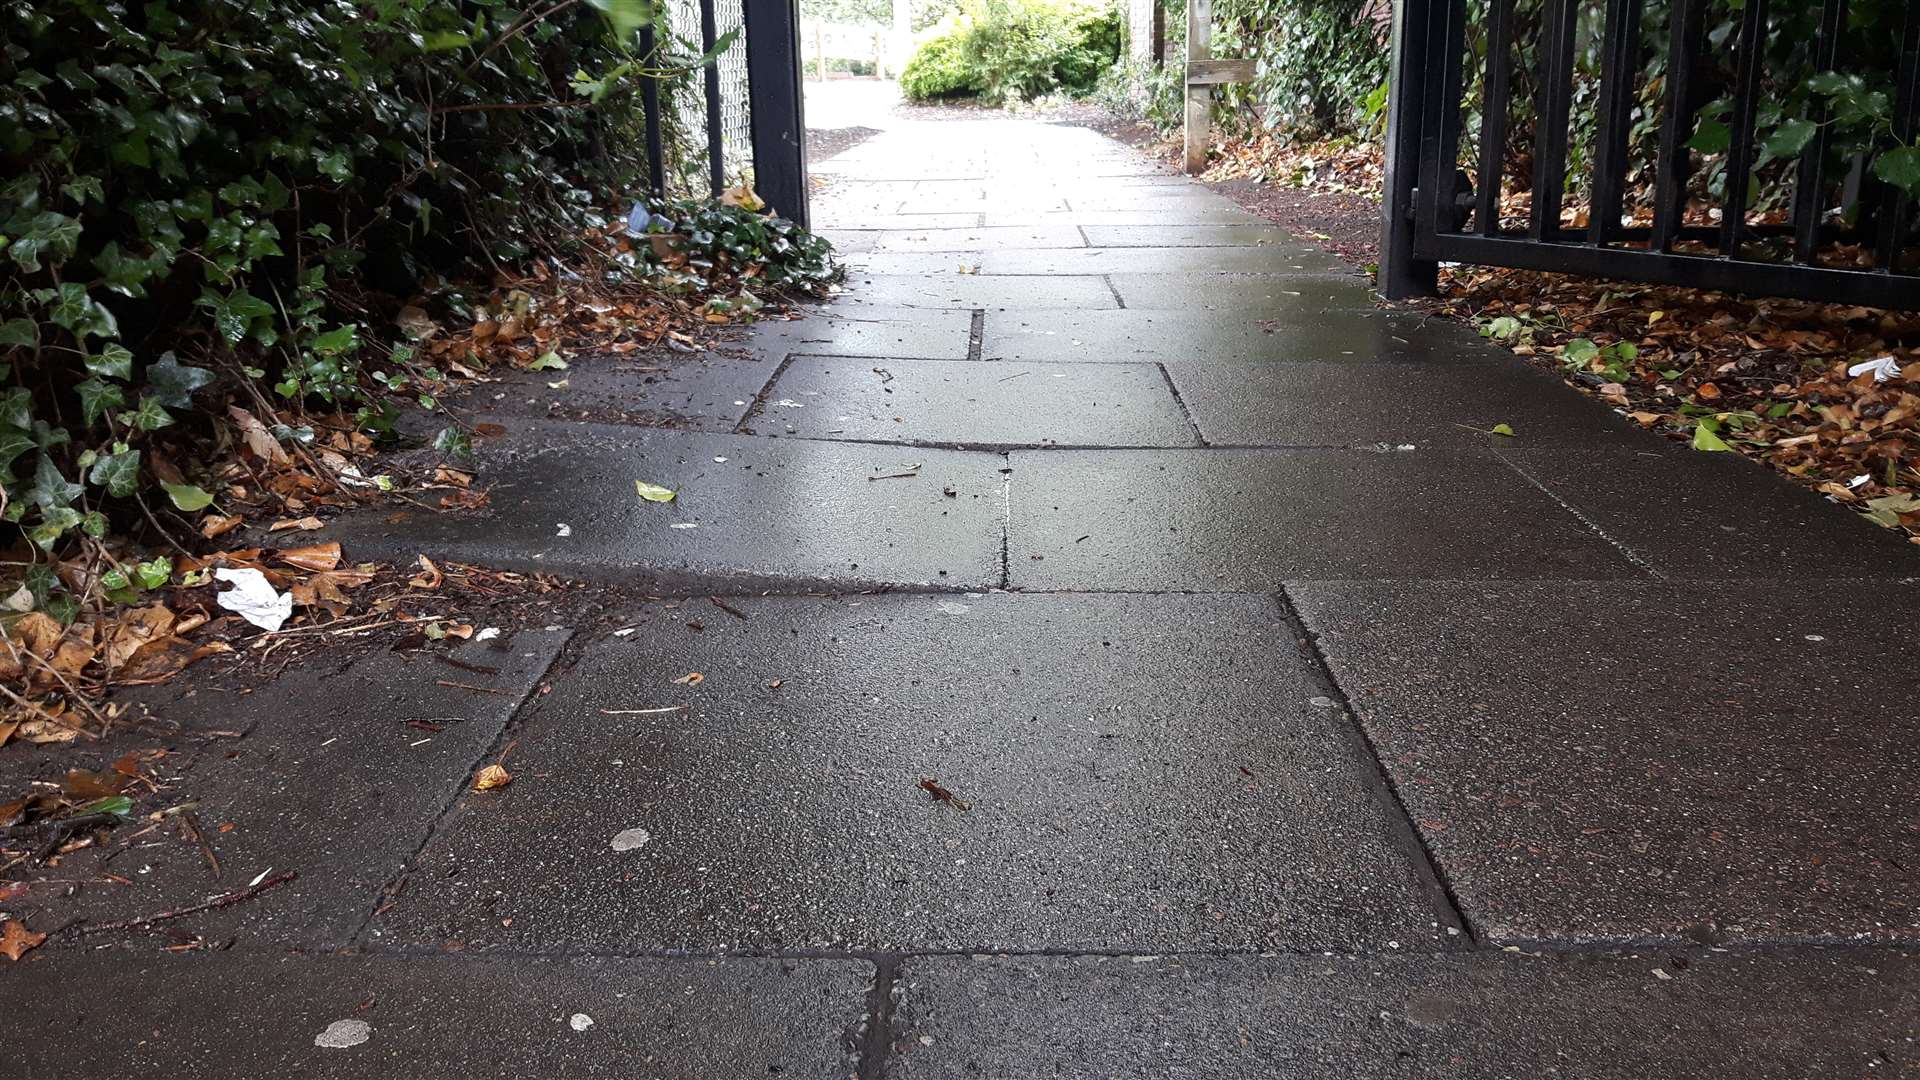 The raised paving slap on the path that connects Queen Street to Park Street